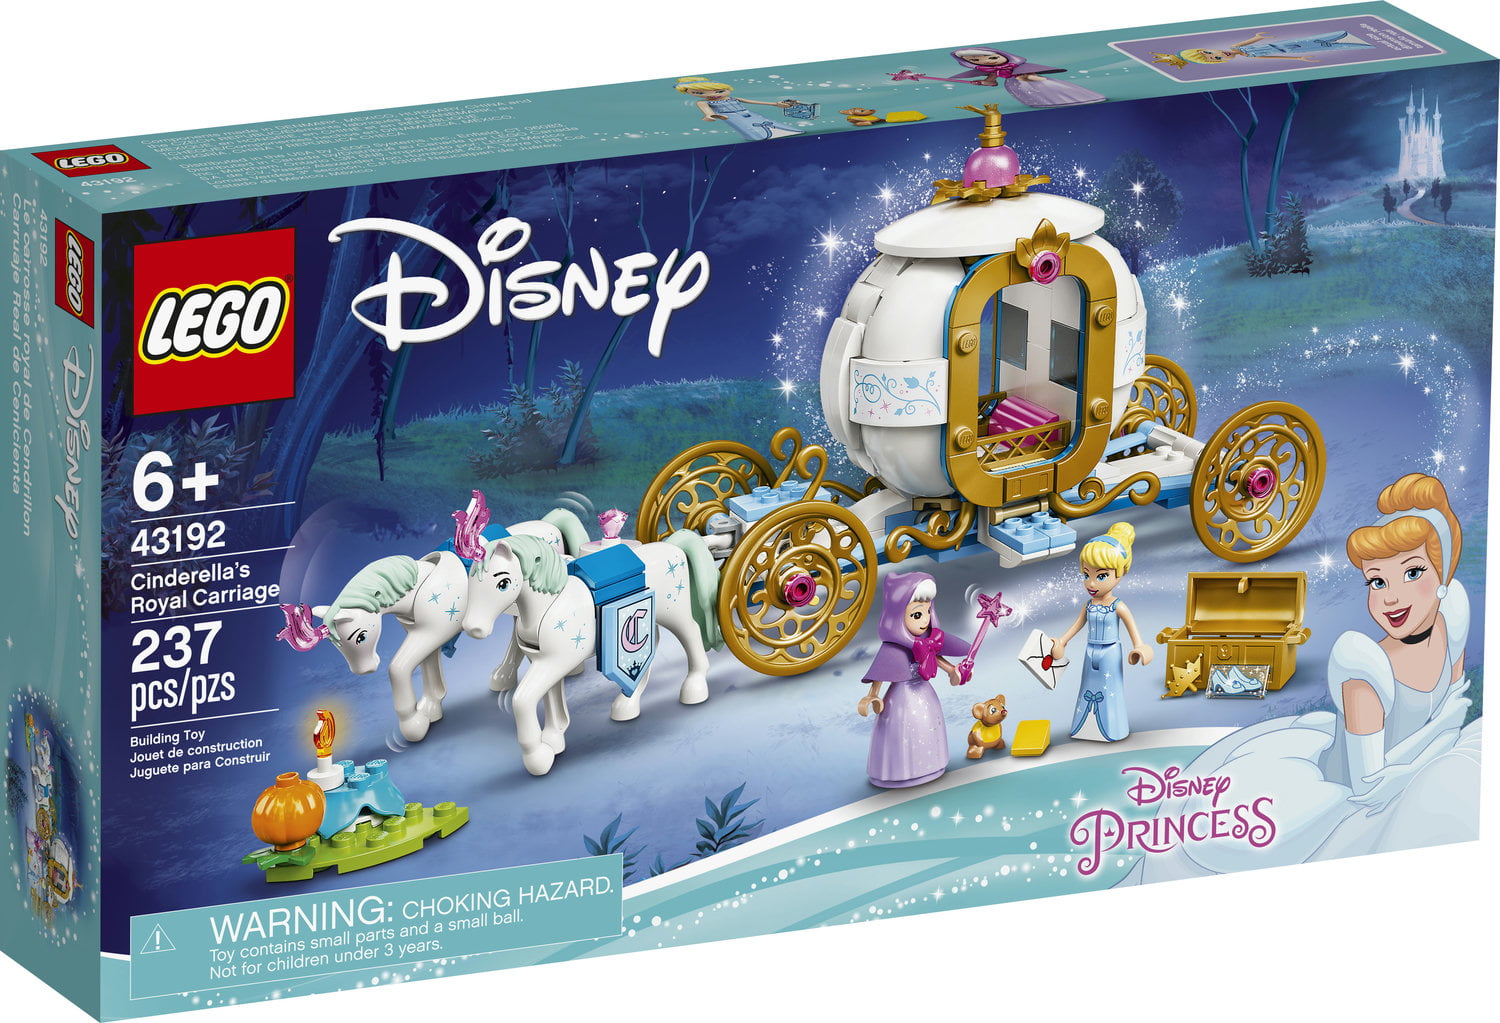 reagere dollar mobil LEGO Disney Cinderella's Royal Carriage 43192; Creative Building Toy Makes  a Great Gift (237 Pieces) - Walmart.com